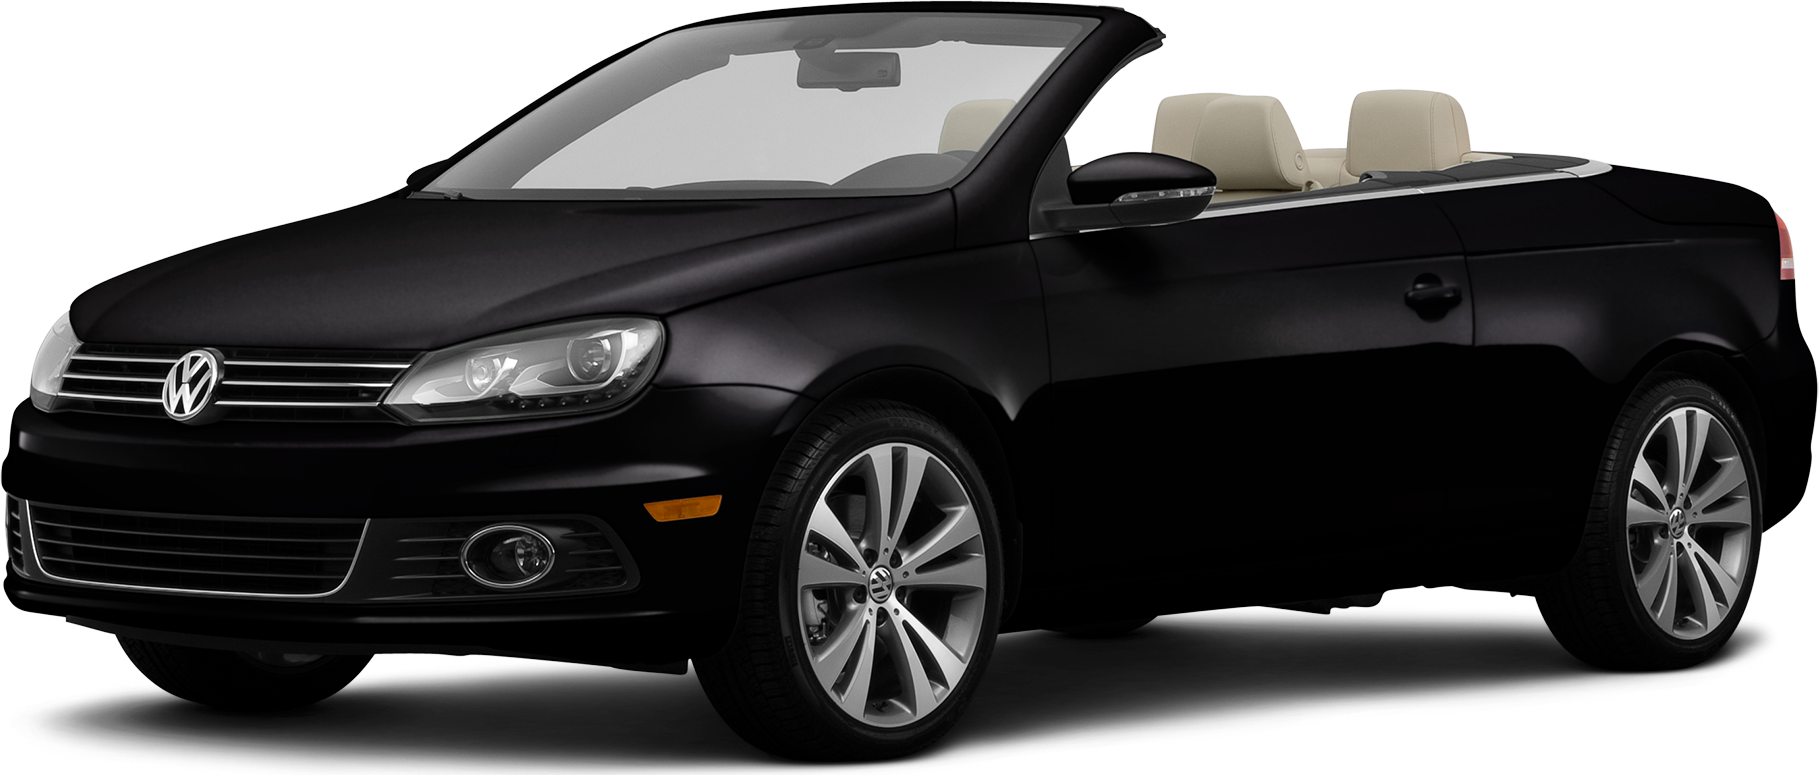 https://file.kelleybluebookimages.com/kbb/base/evox/CP/8405/2013-Volkswagen-Eos-front_8405_032_1819x775_2T2T_cropped.png